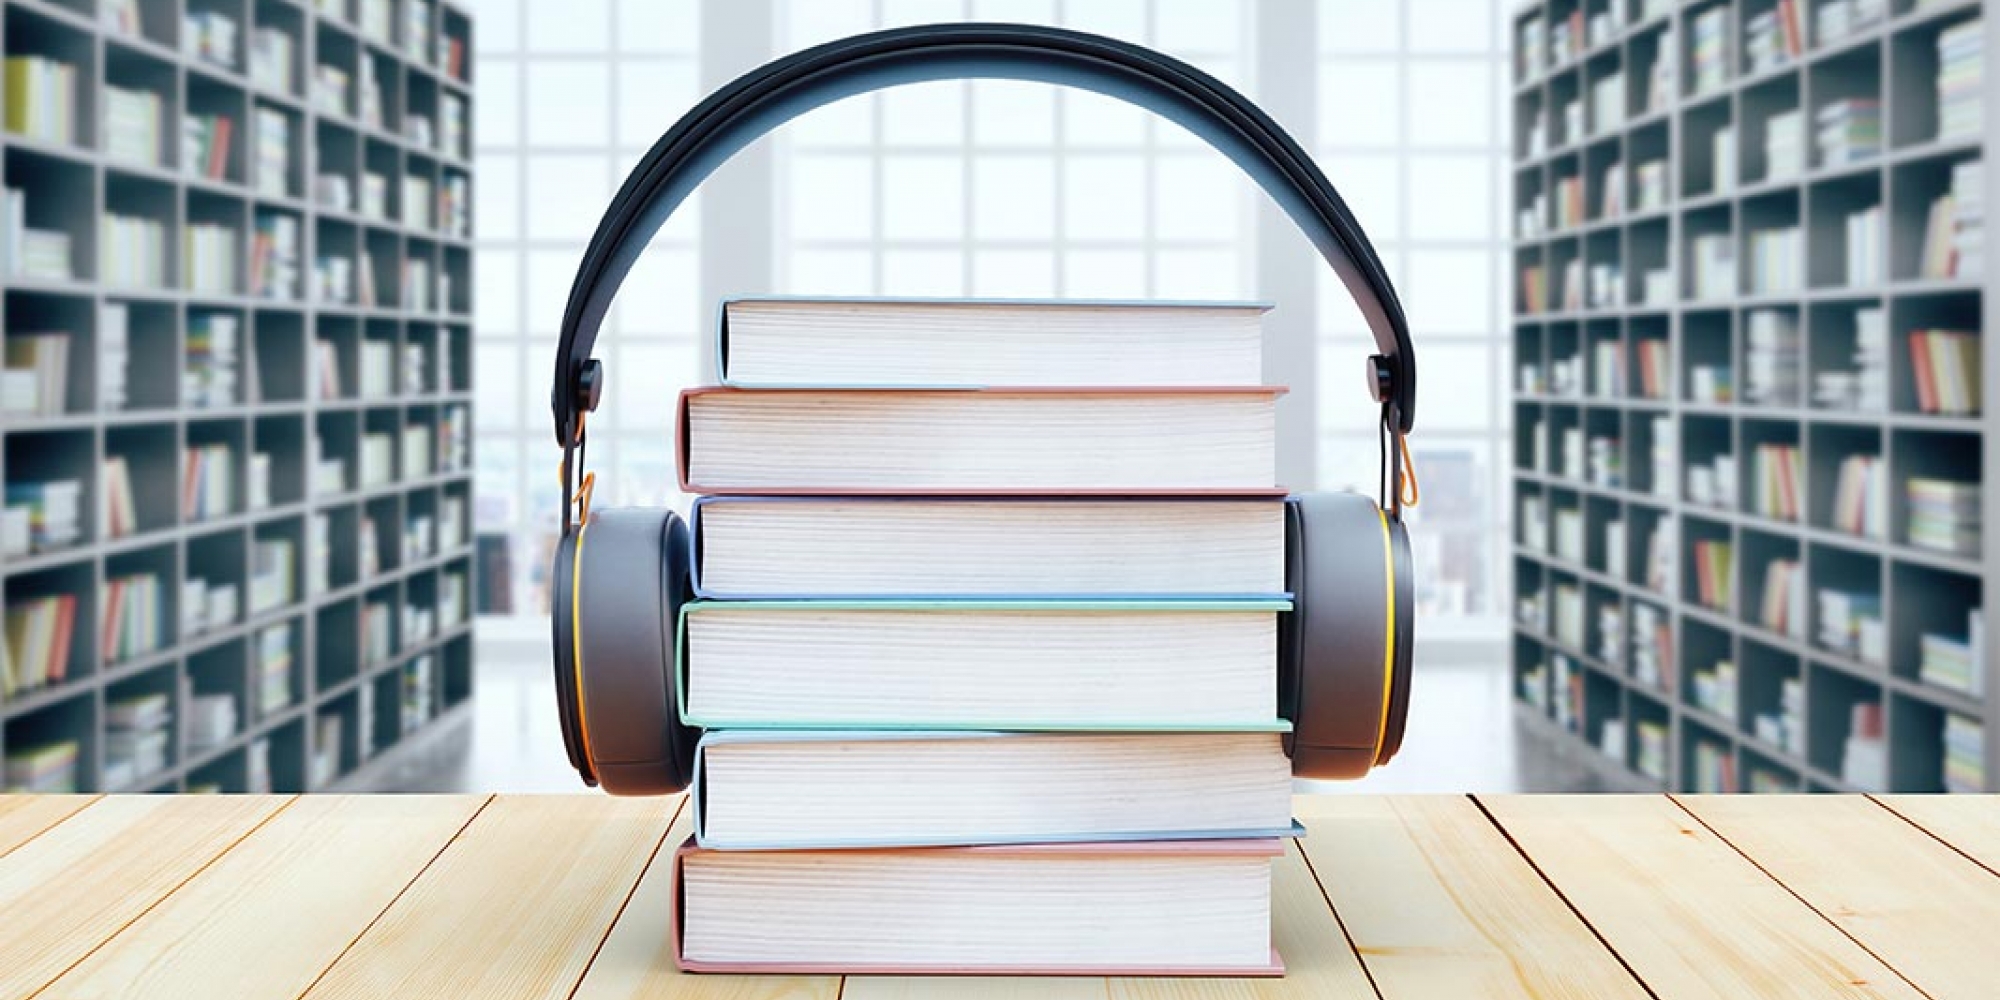 Discover the 5 Reasons Why Audiobooks are so Popular